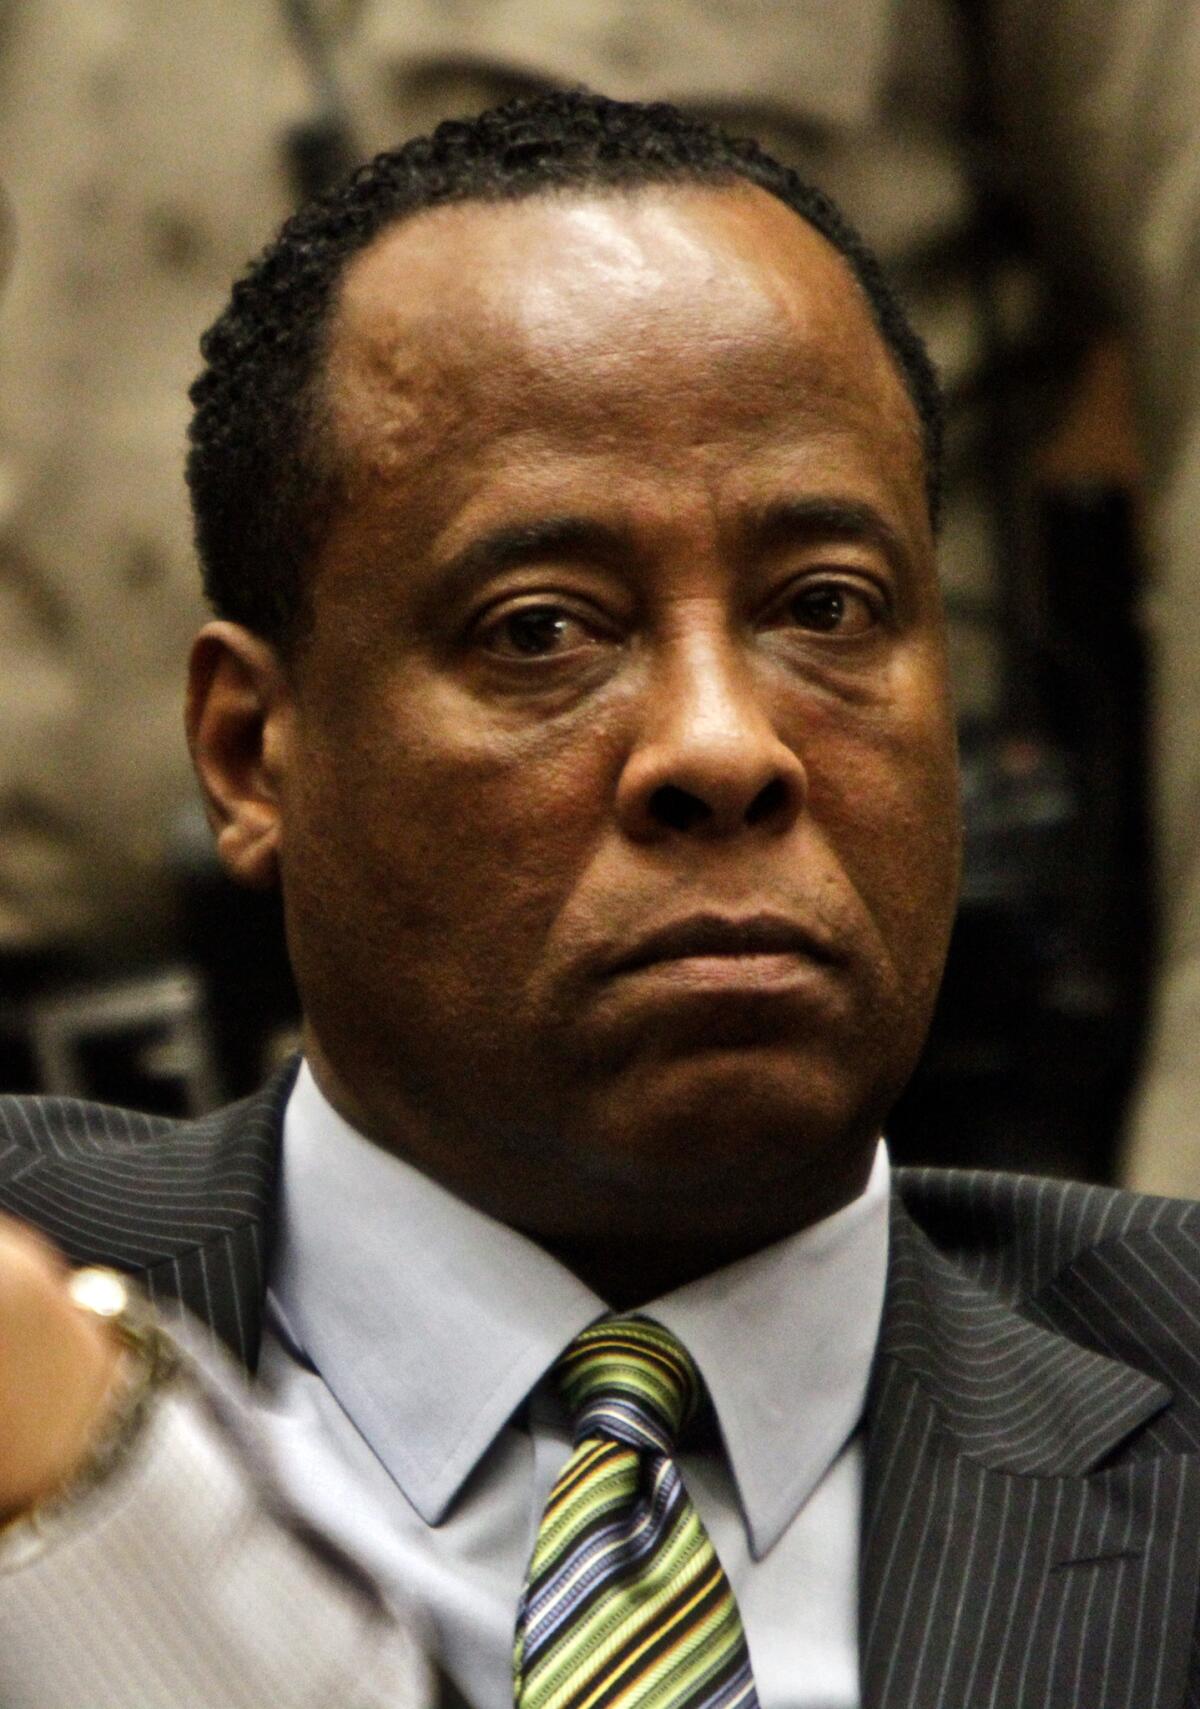 Dr. Conrad Murray during his involuntary manslaughter trial.